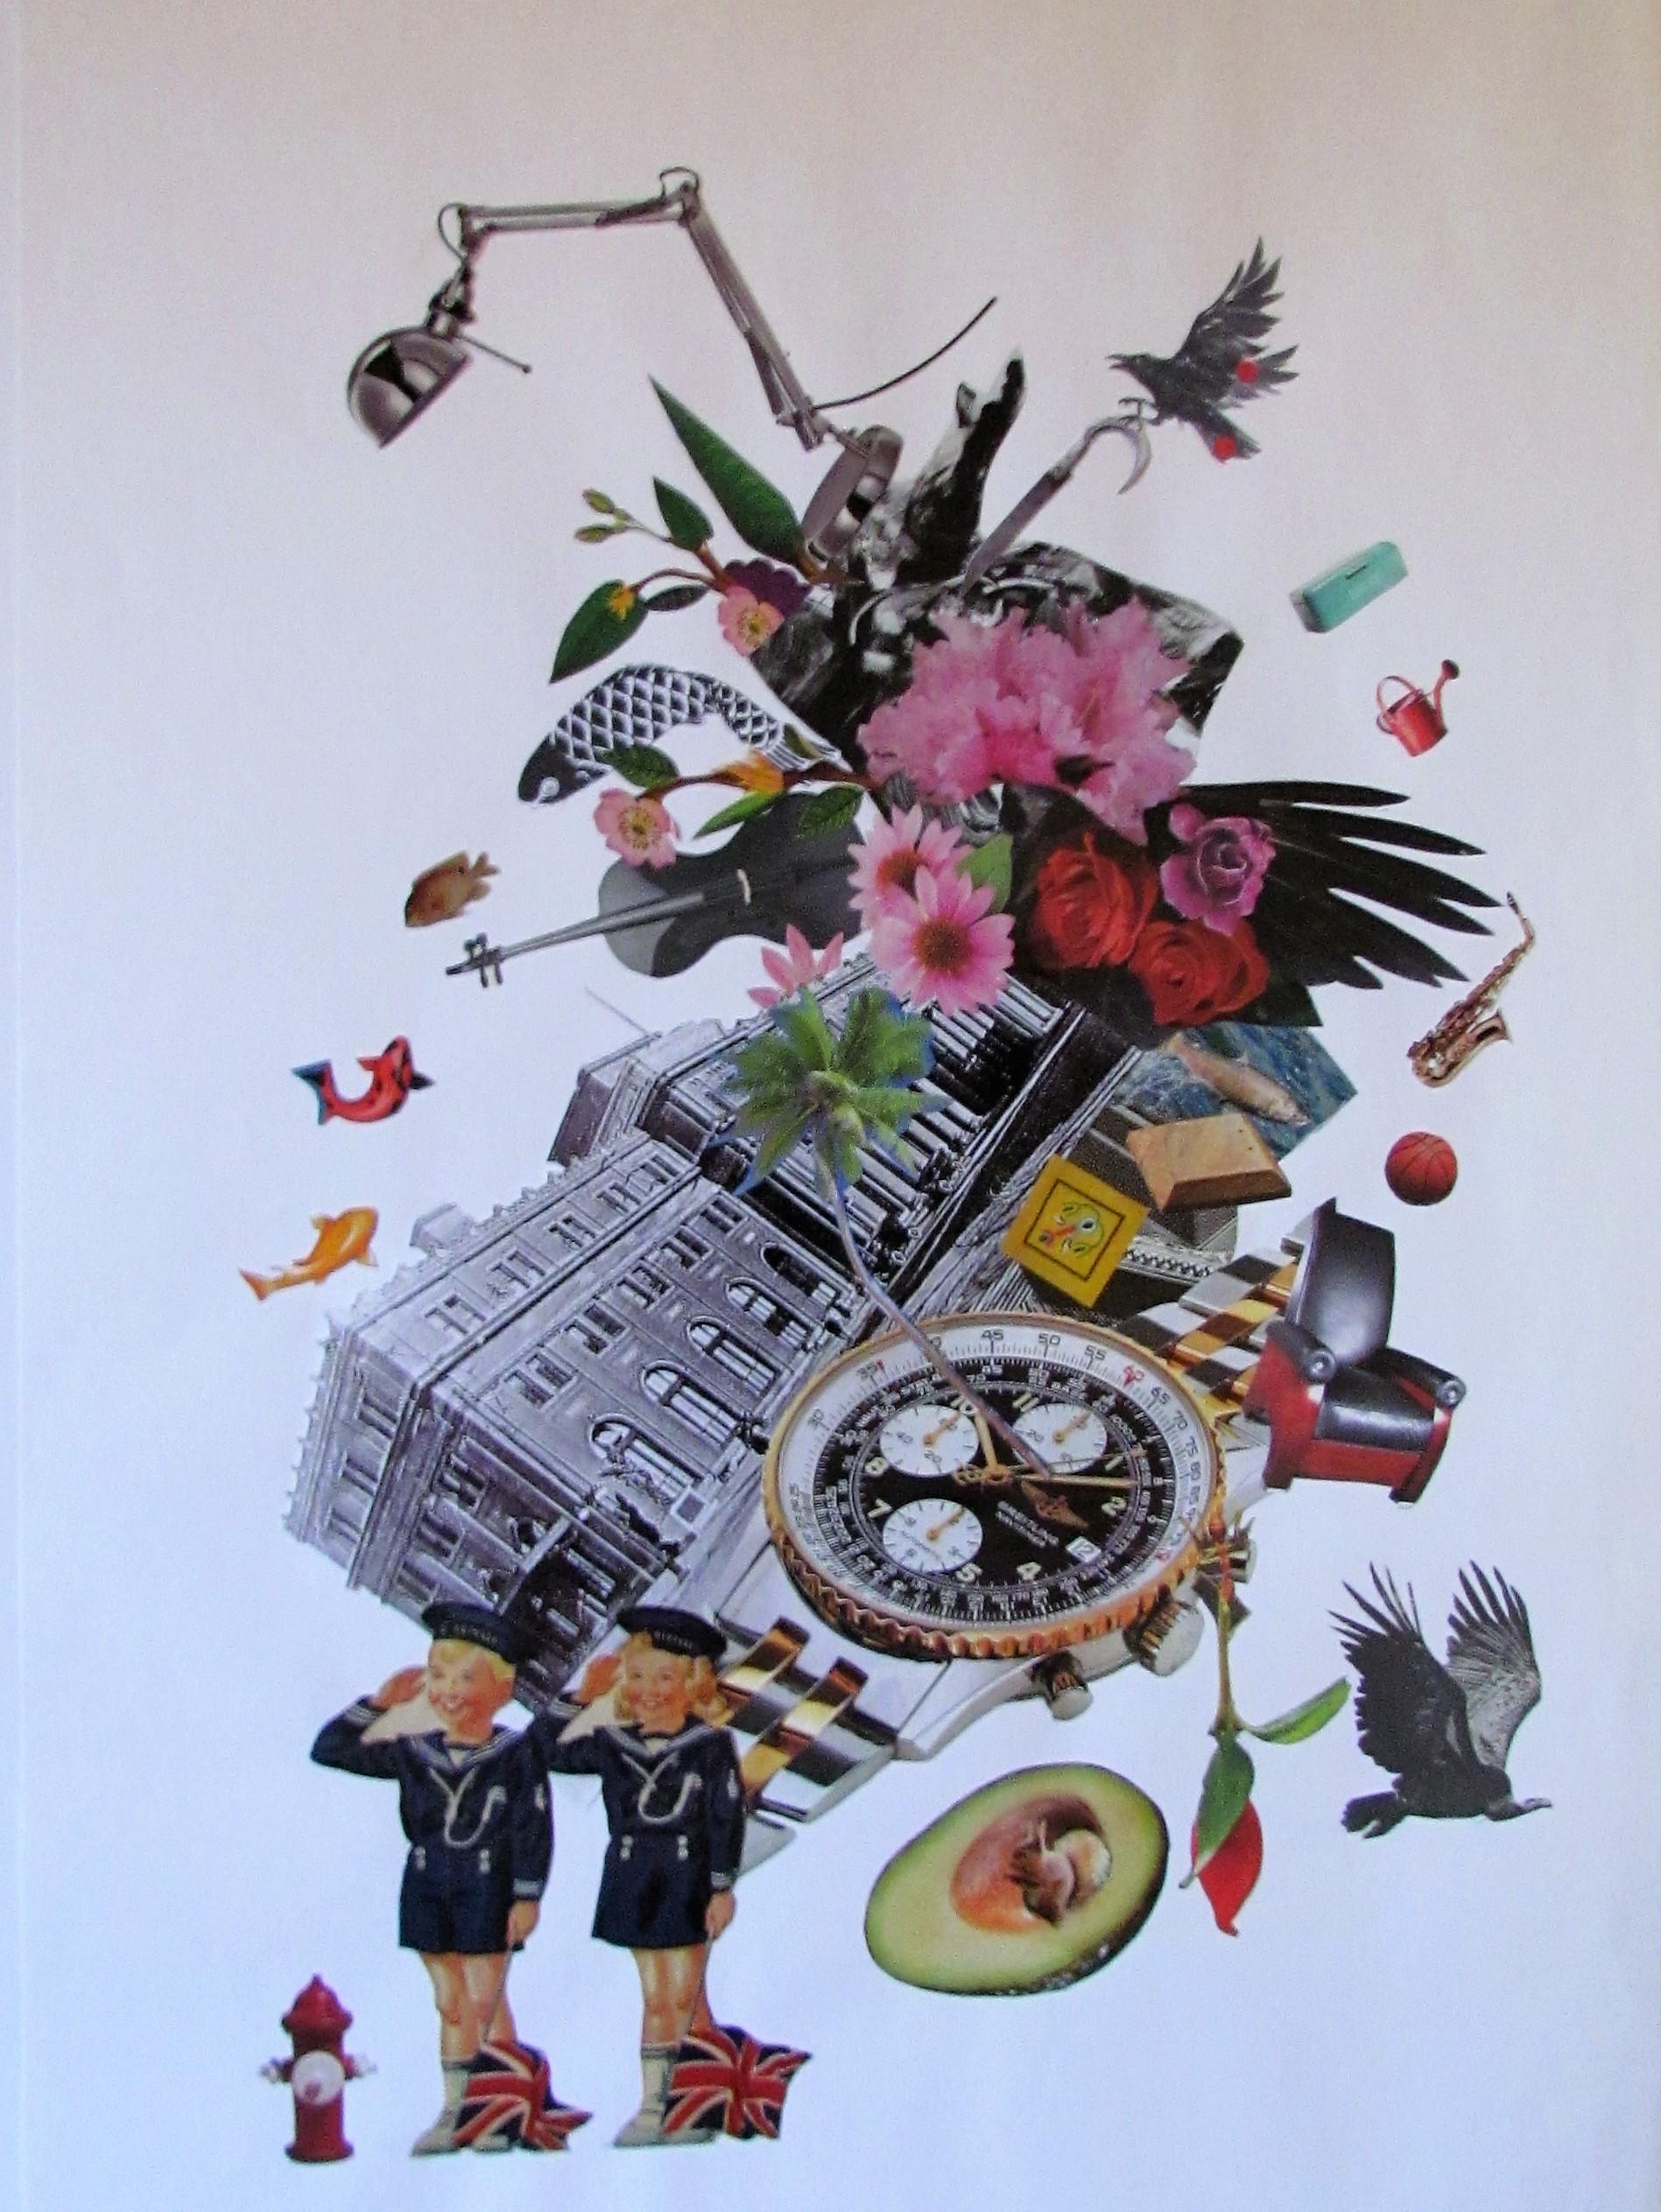 Everything Is Going to Be Alright - collage, framed - Mixed Media Art by Alison Keenan